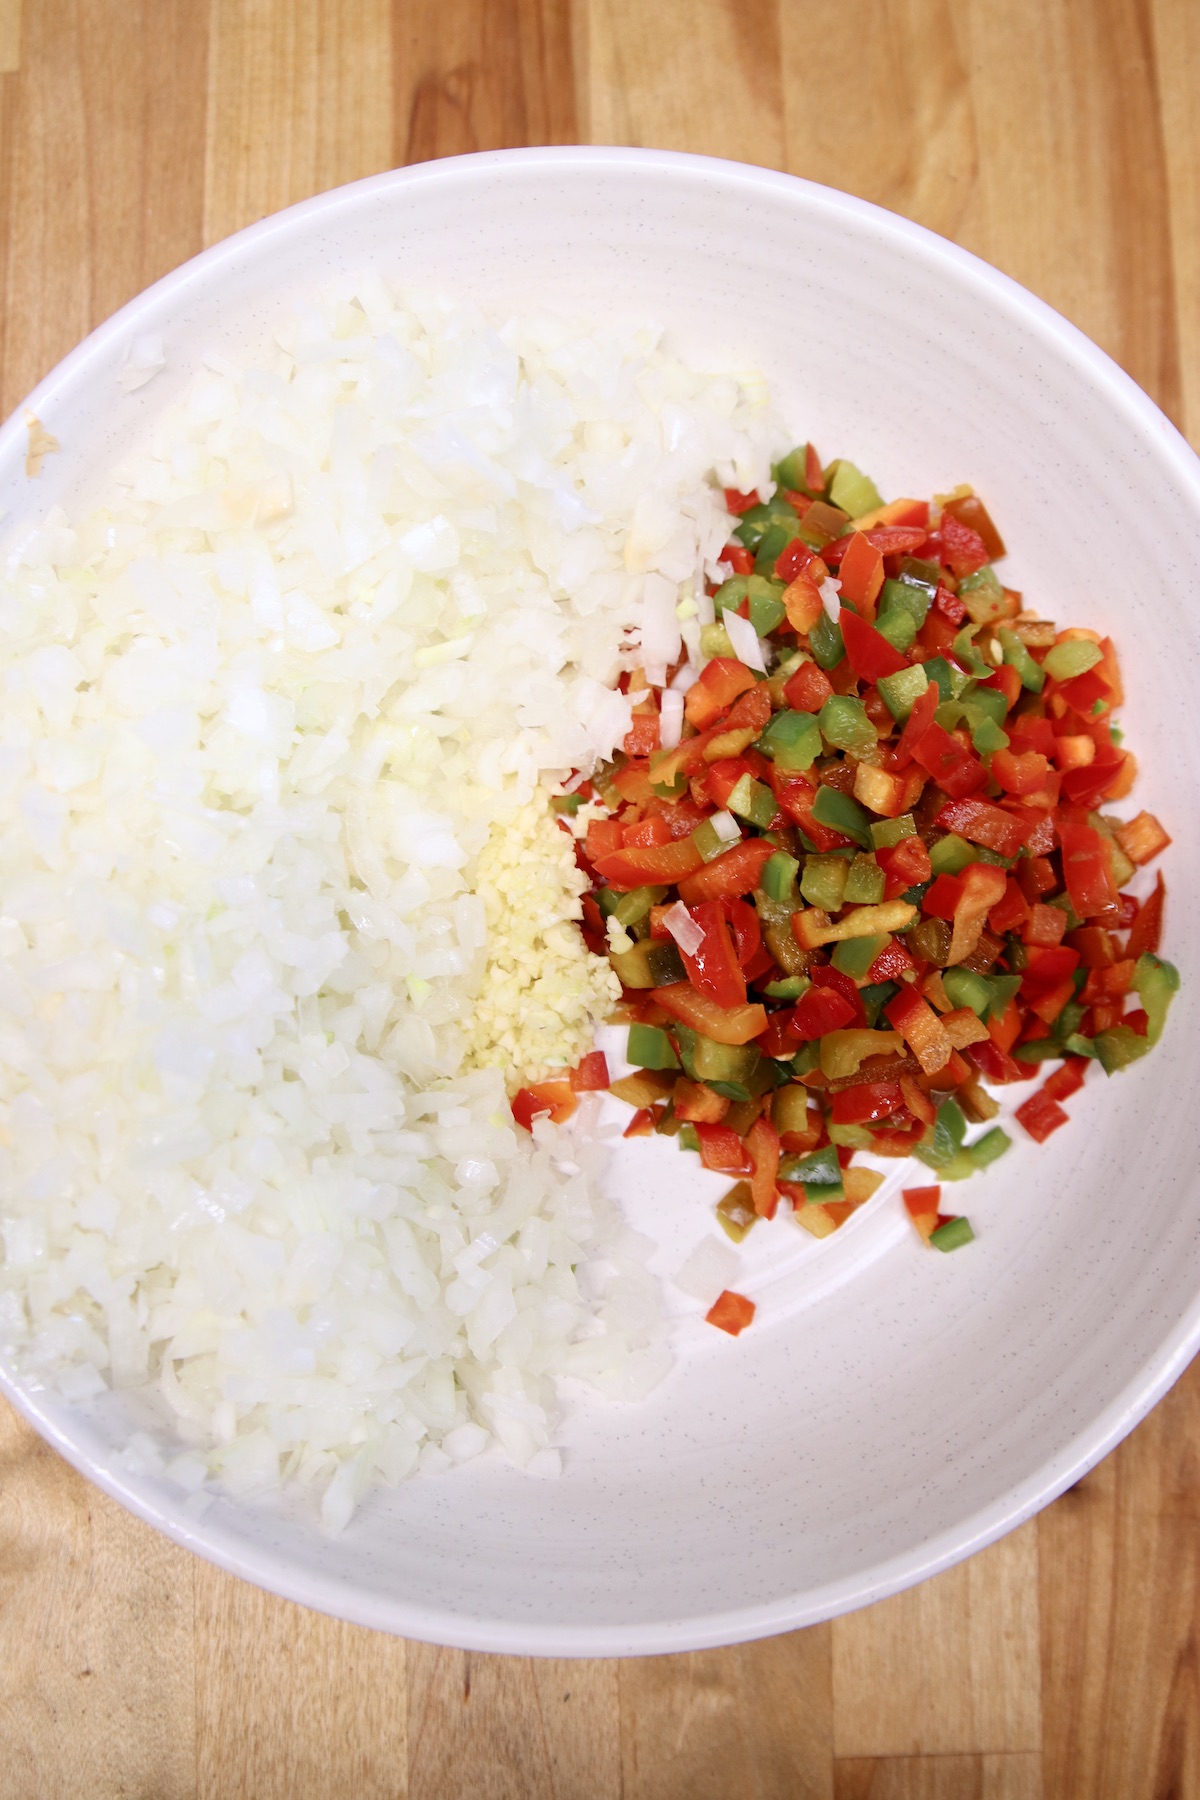 bowl of diced onions, minced garlic, diced red and green bell peppers